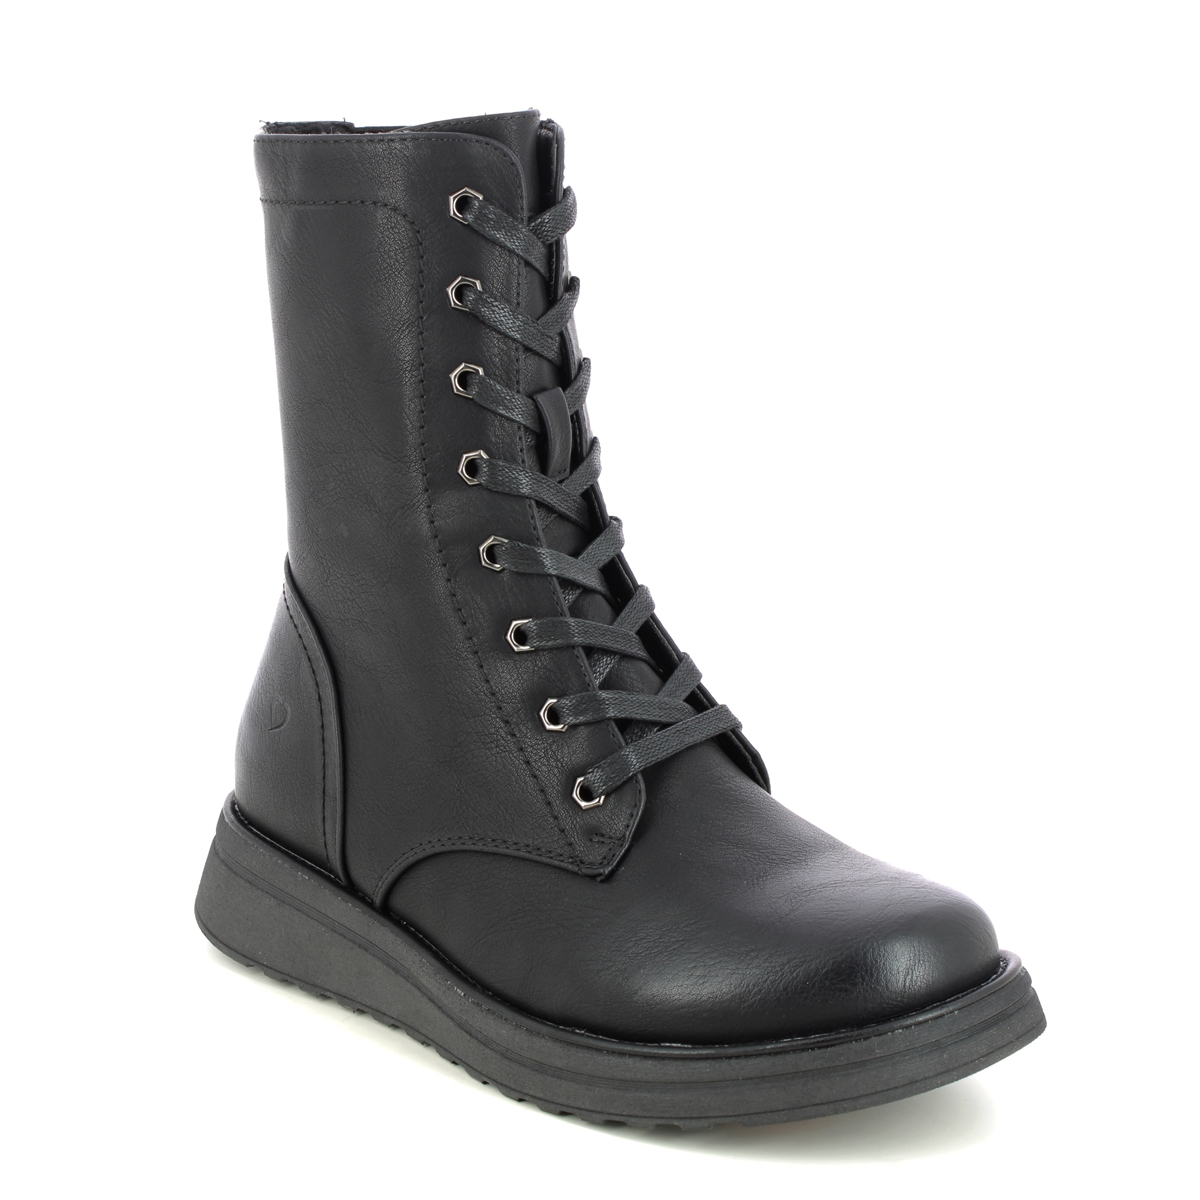 Heavenly Feet Martina Walker Black Womens Lace Up Boots 3509-34 In Size 6 In Plain Black